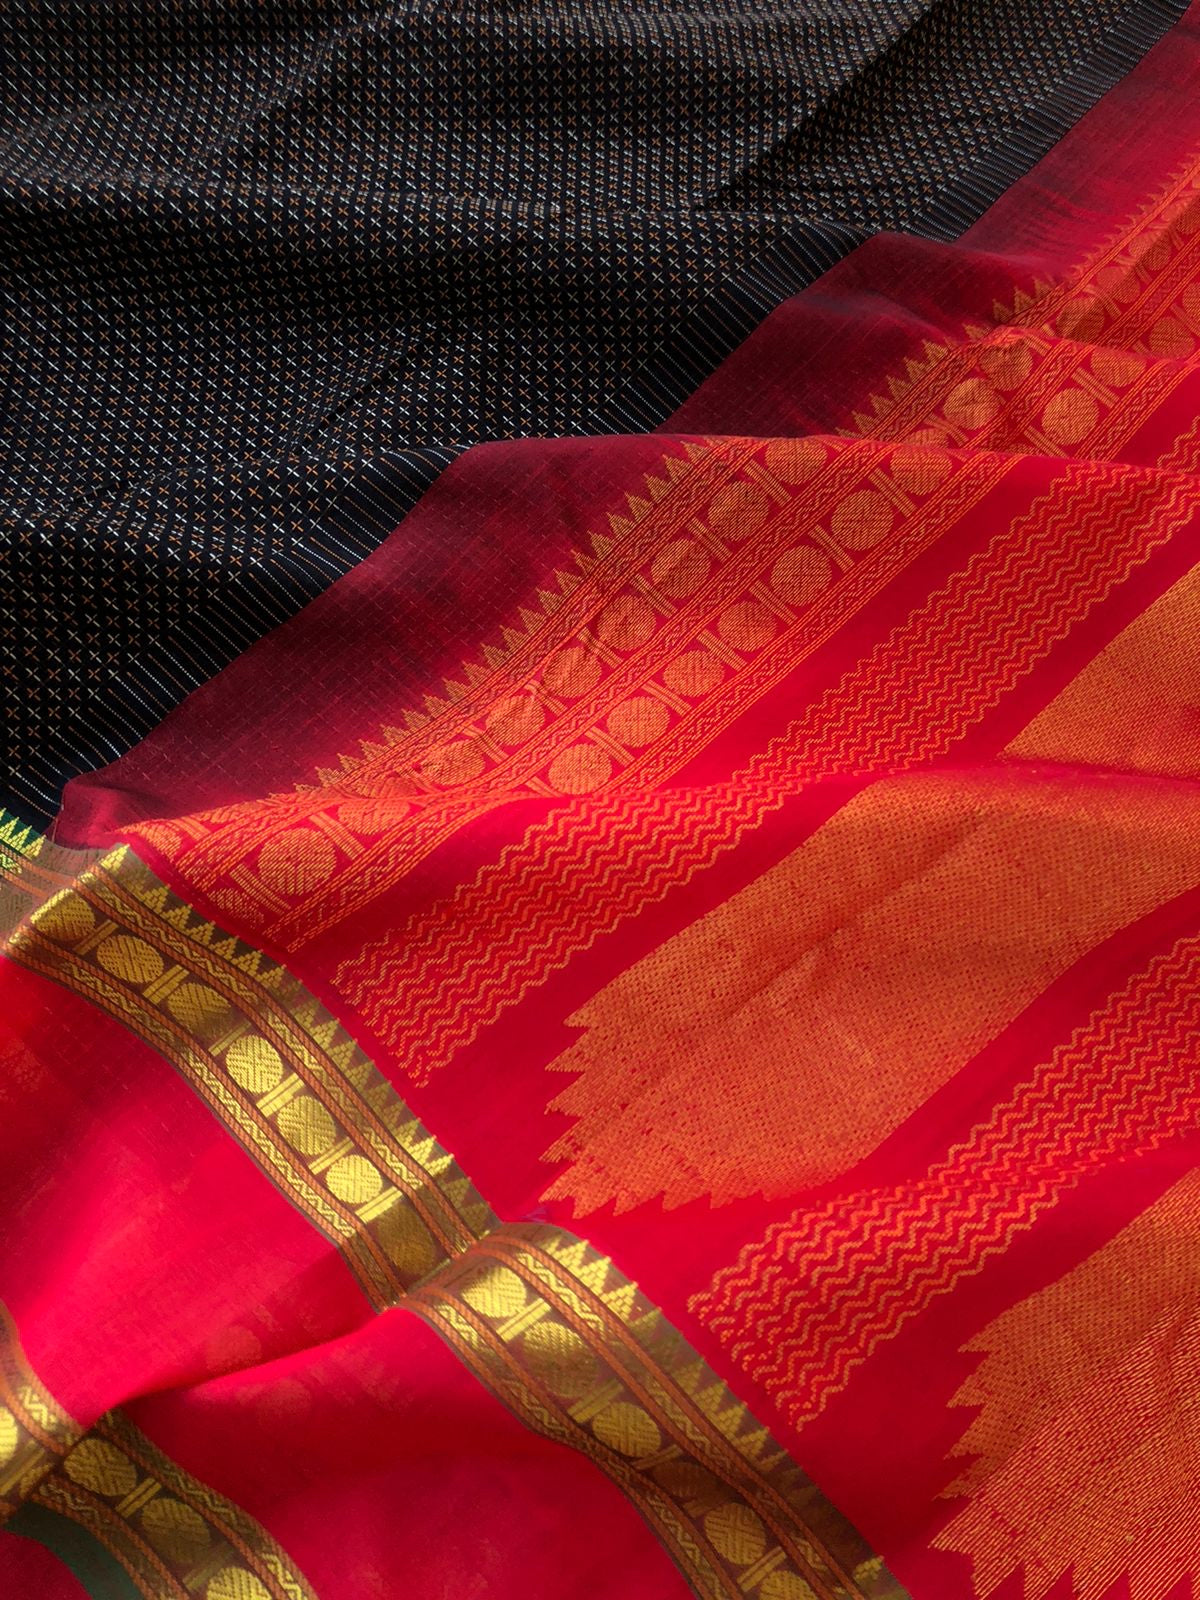 Woven Motifs Silk Cotton - black and deep red all over body pluse buttas